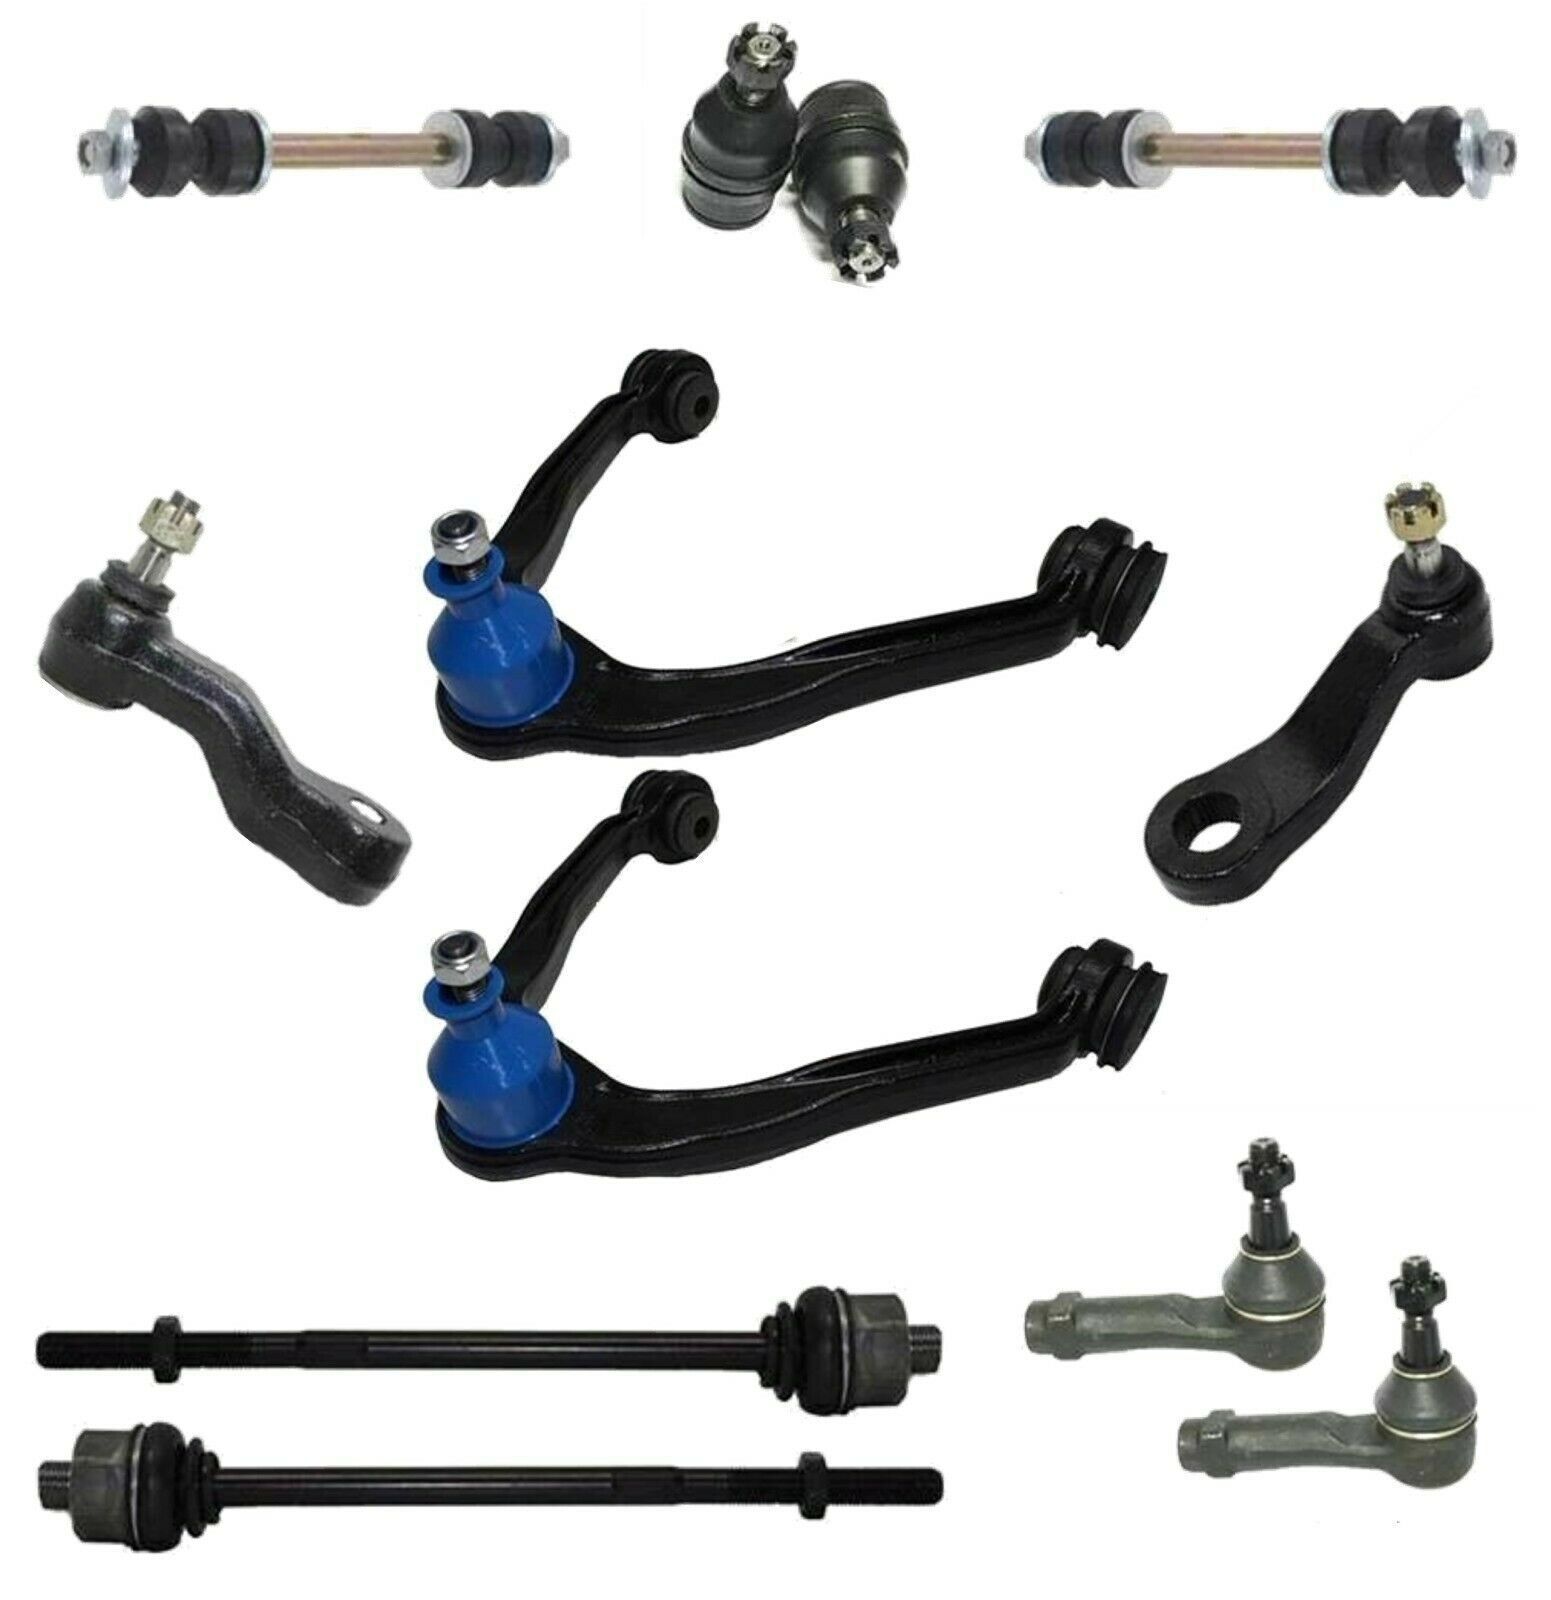 12 New Pc Complete Front Suspension Kit for Chevrolet GMC Truck (Check 2WD/4x4)